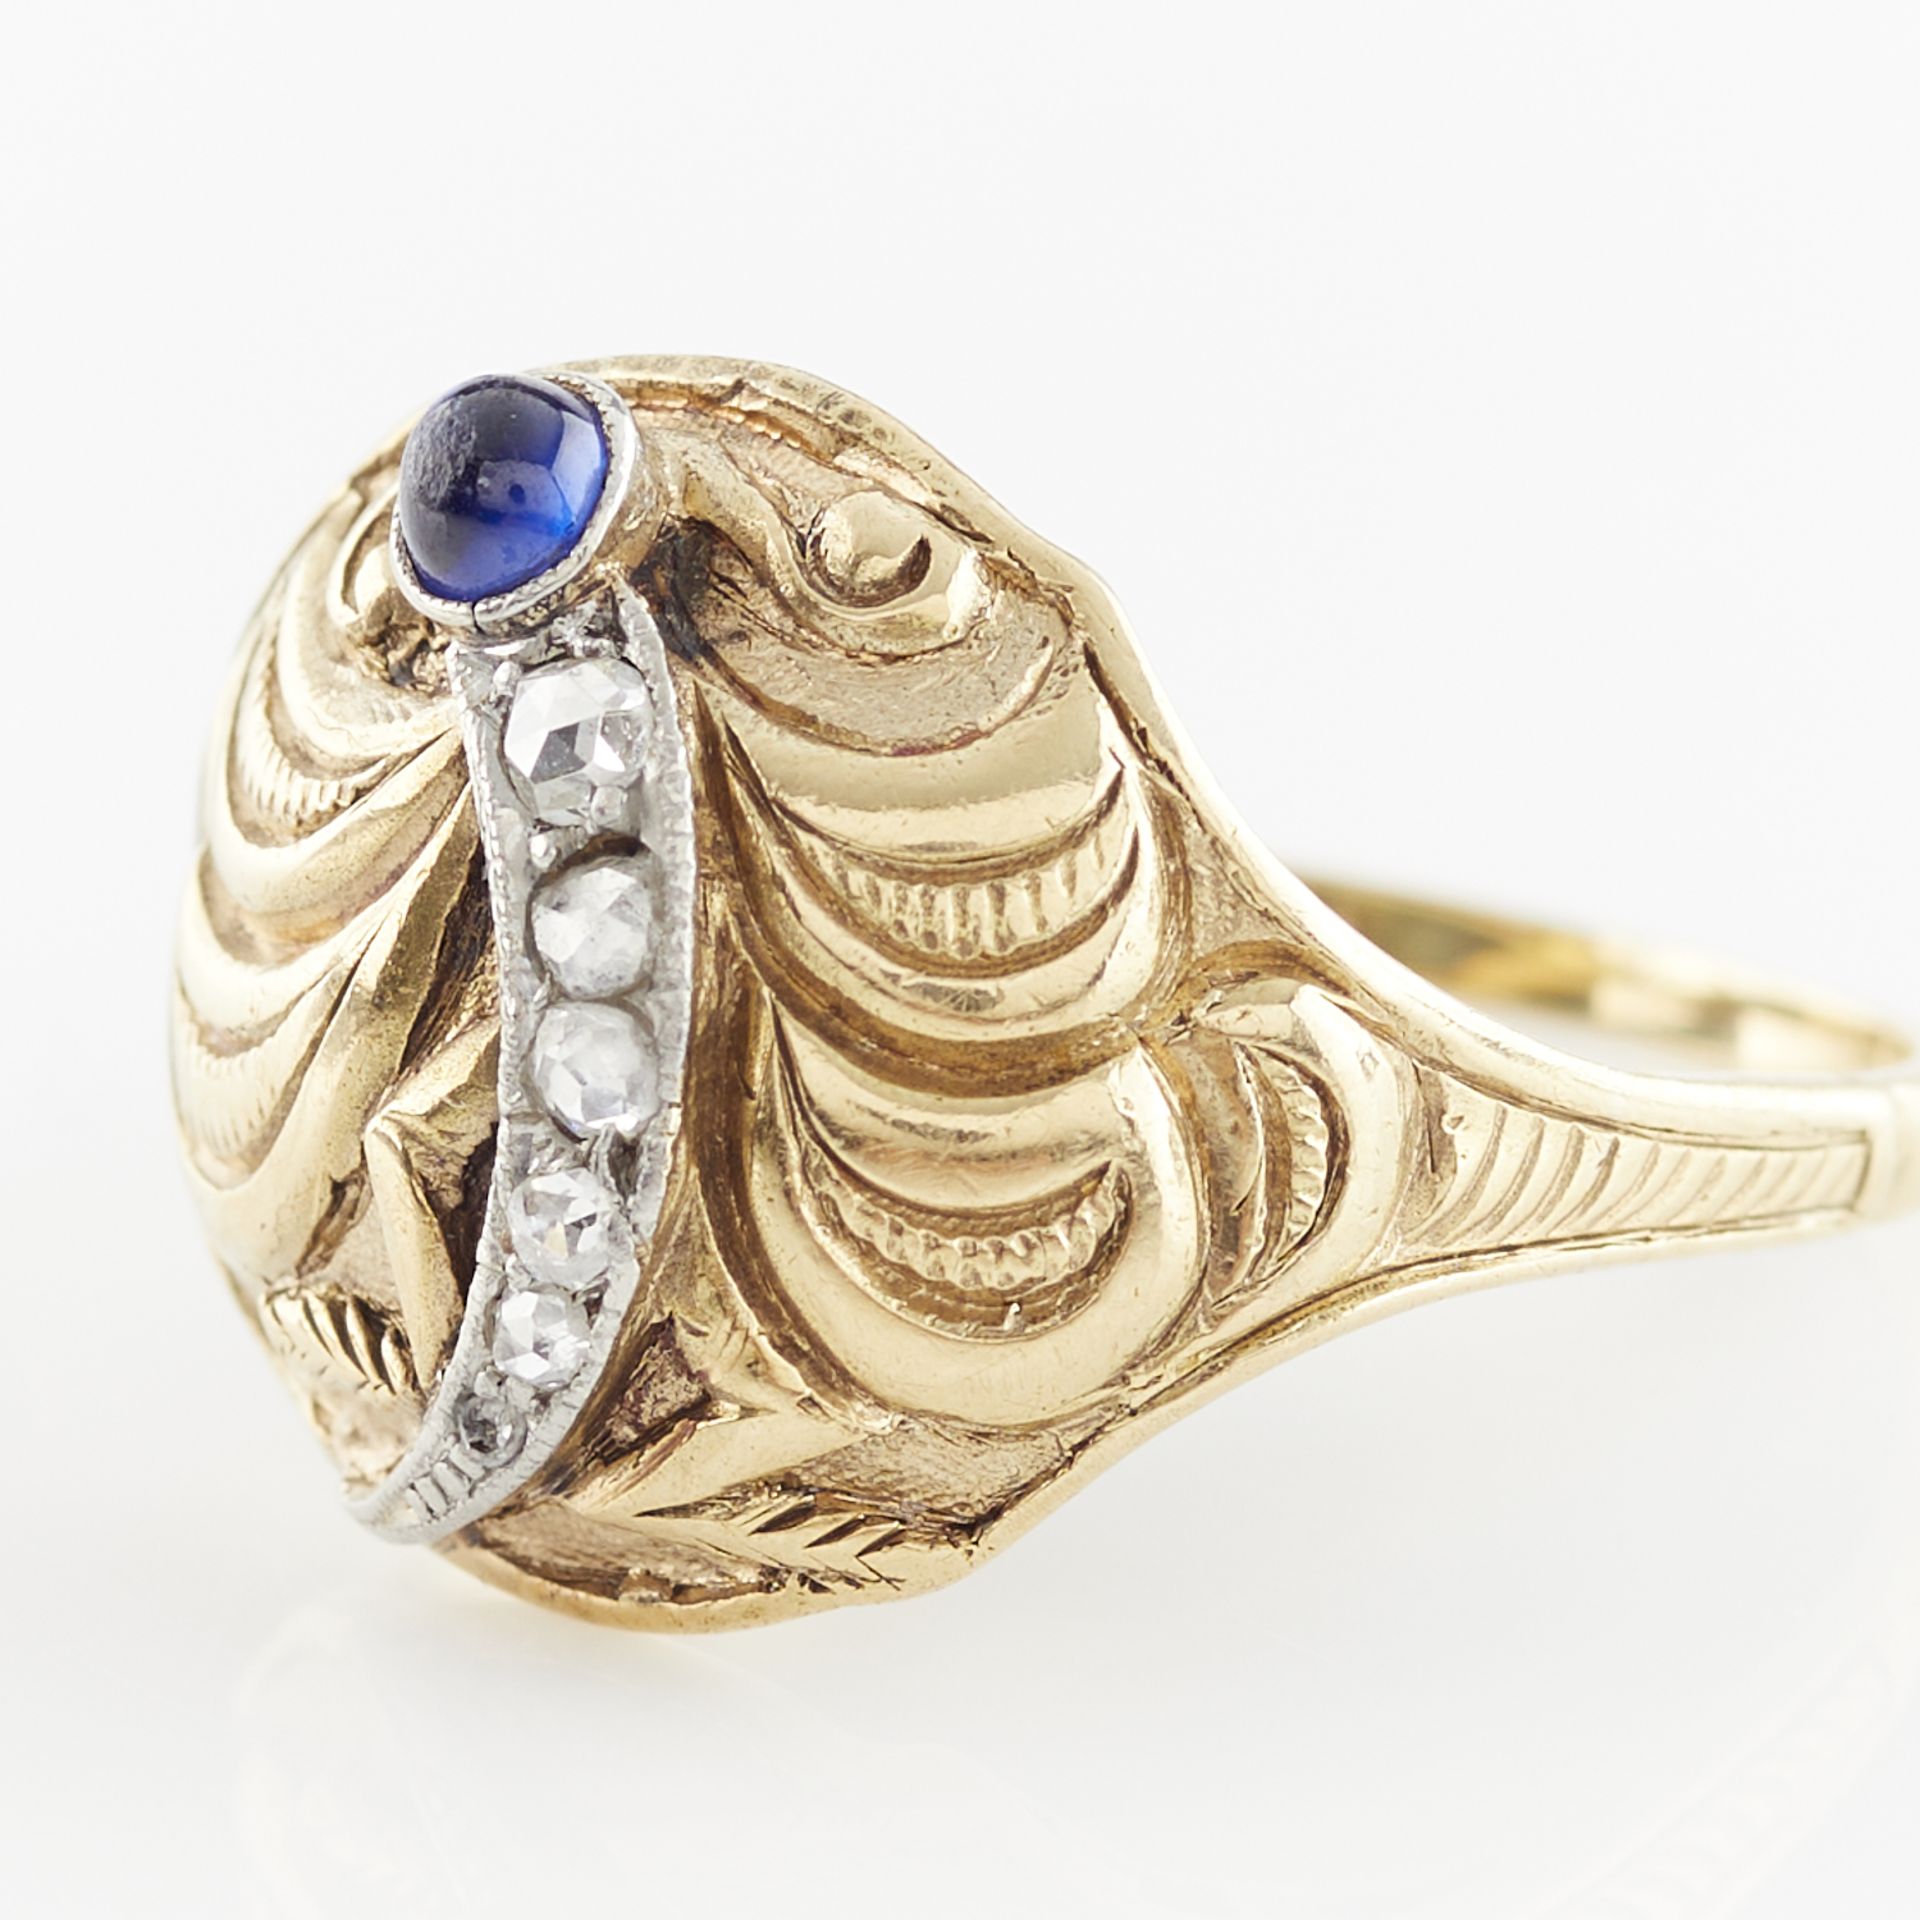 Cozzolino 14k Dragon Fly Ring w/ Dia. & Sapphire - Image 11 of 11